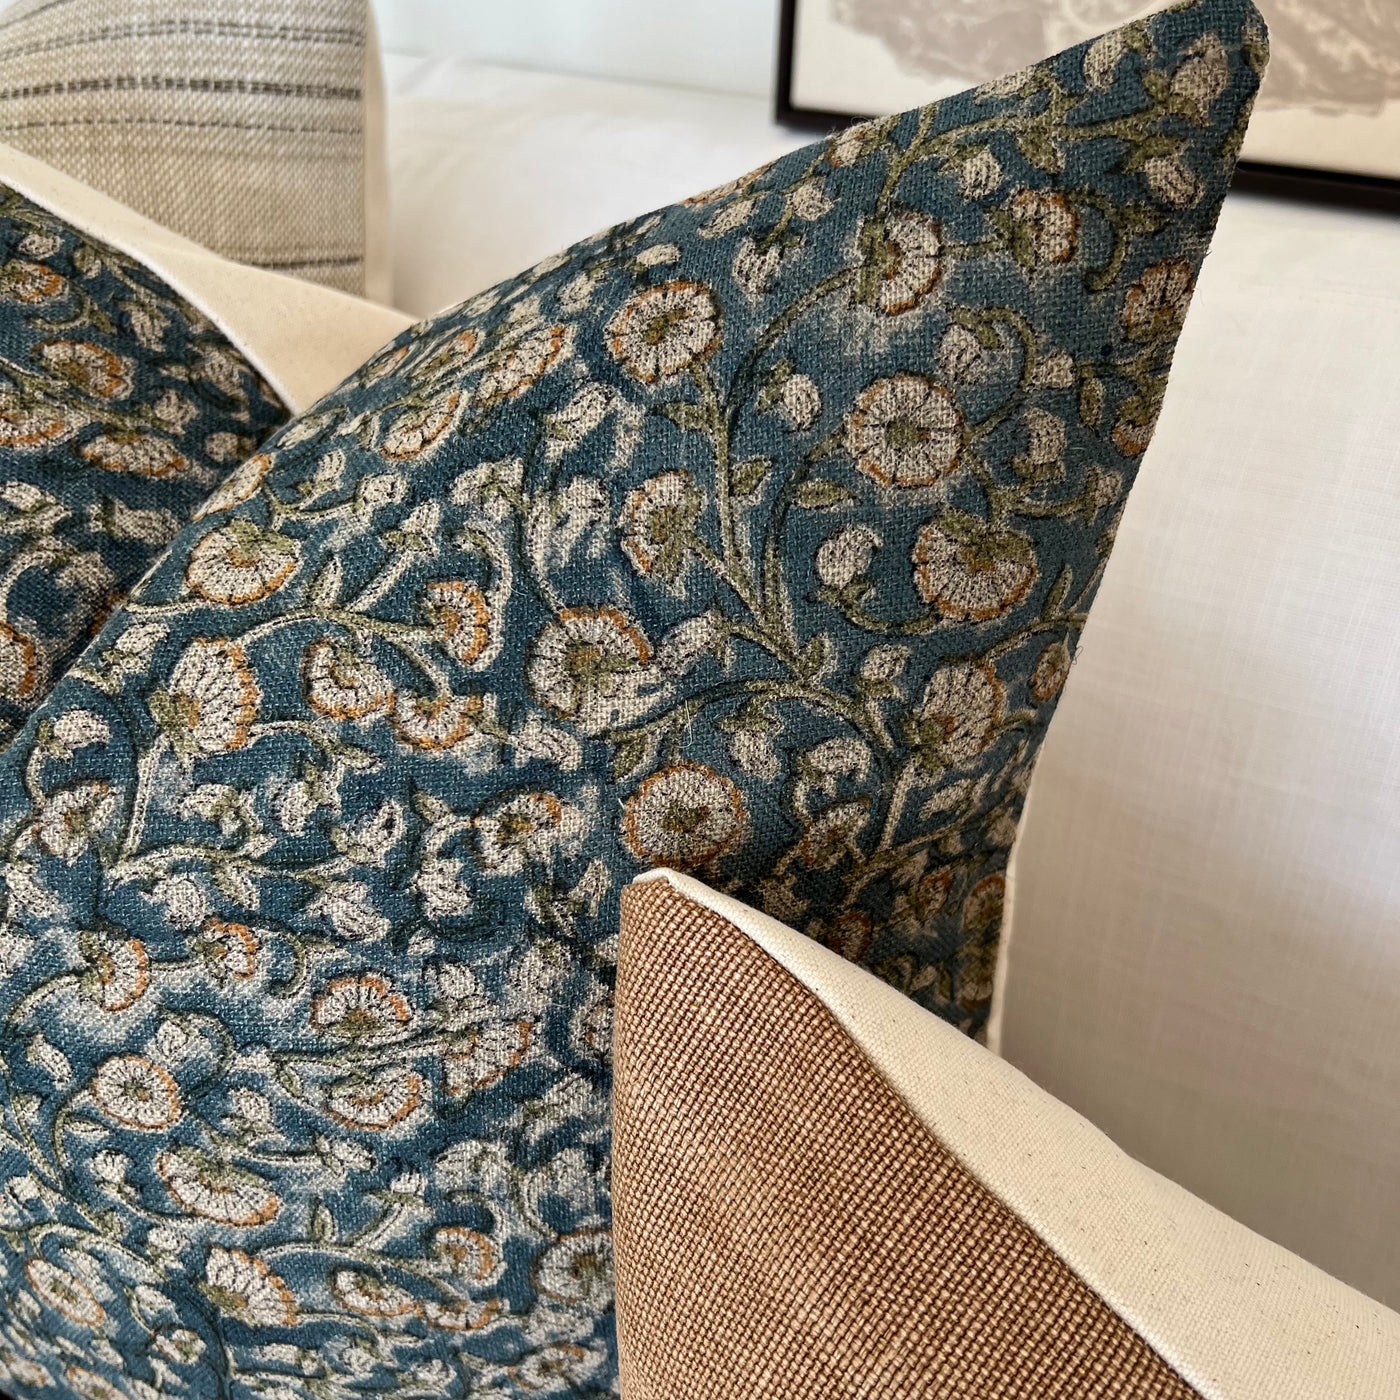 Coordinating Your Comforter Set With Your Throw Pillows – ONE AFFIRMATION